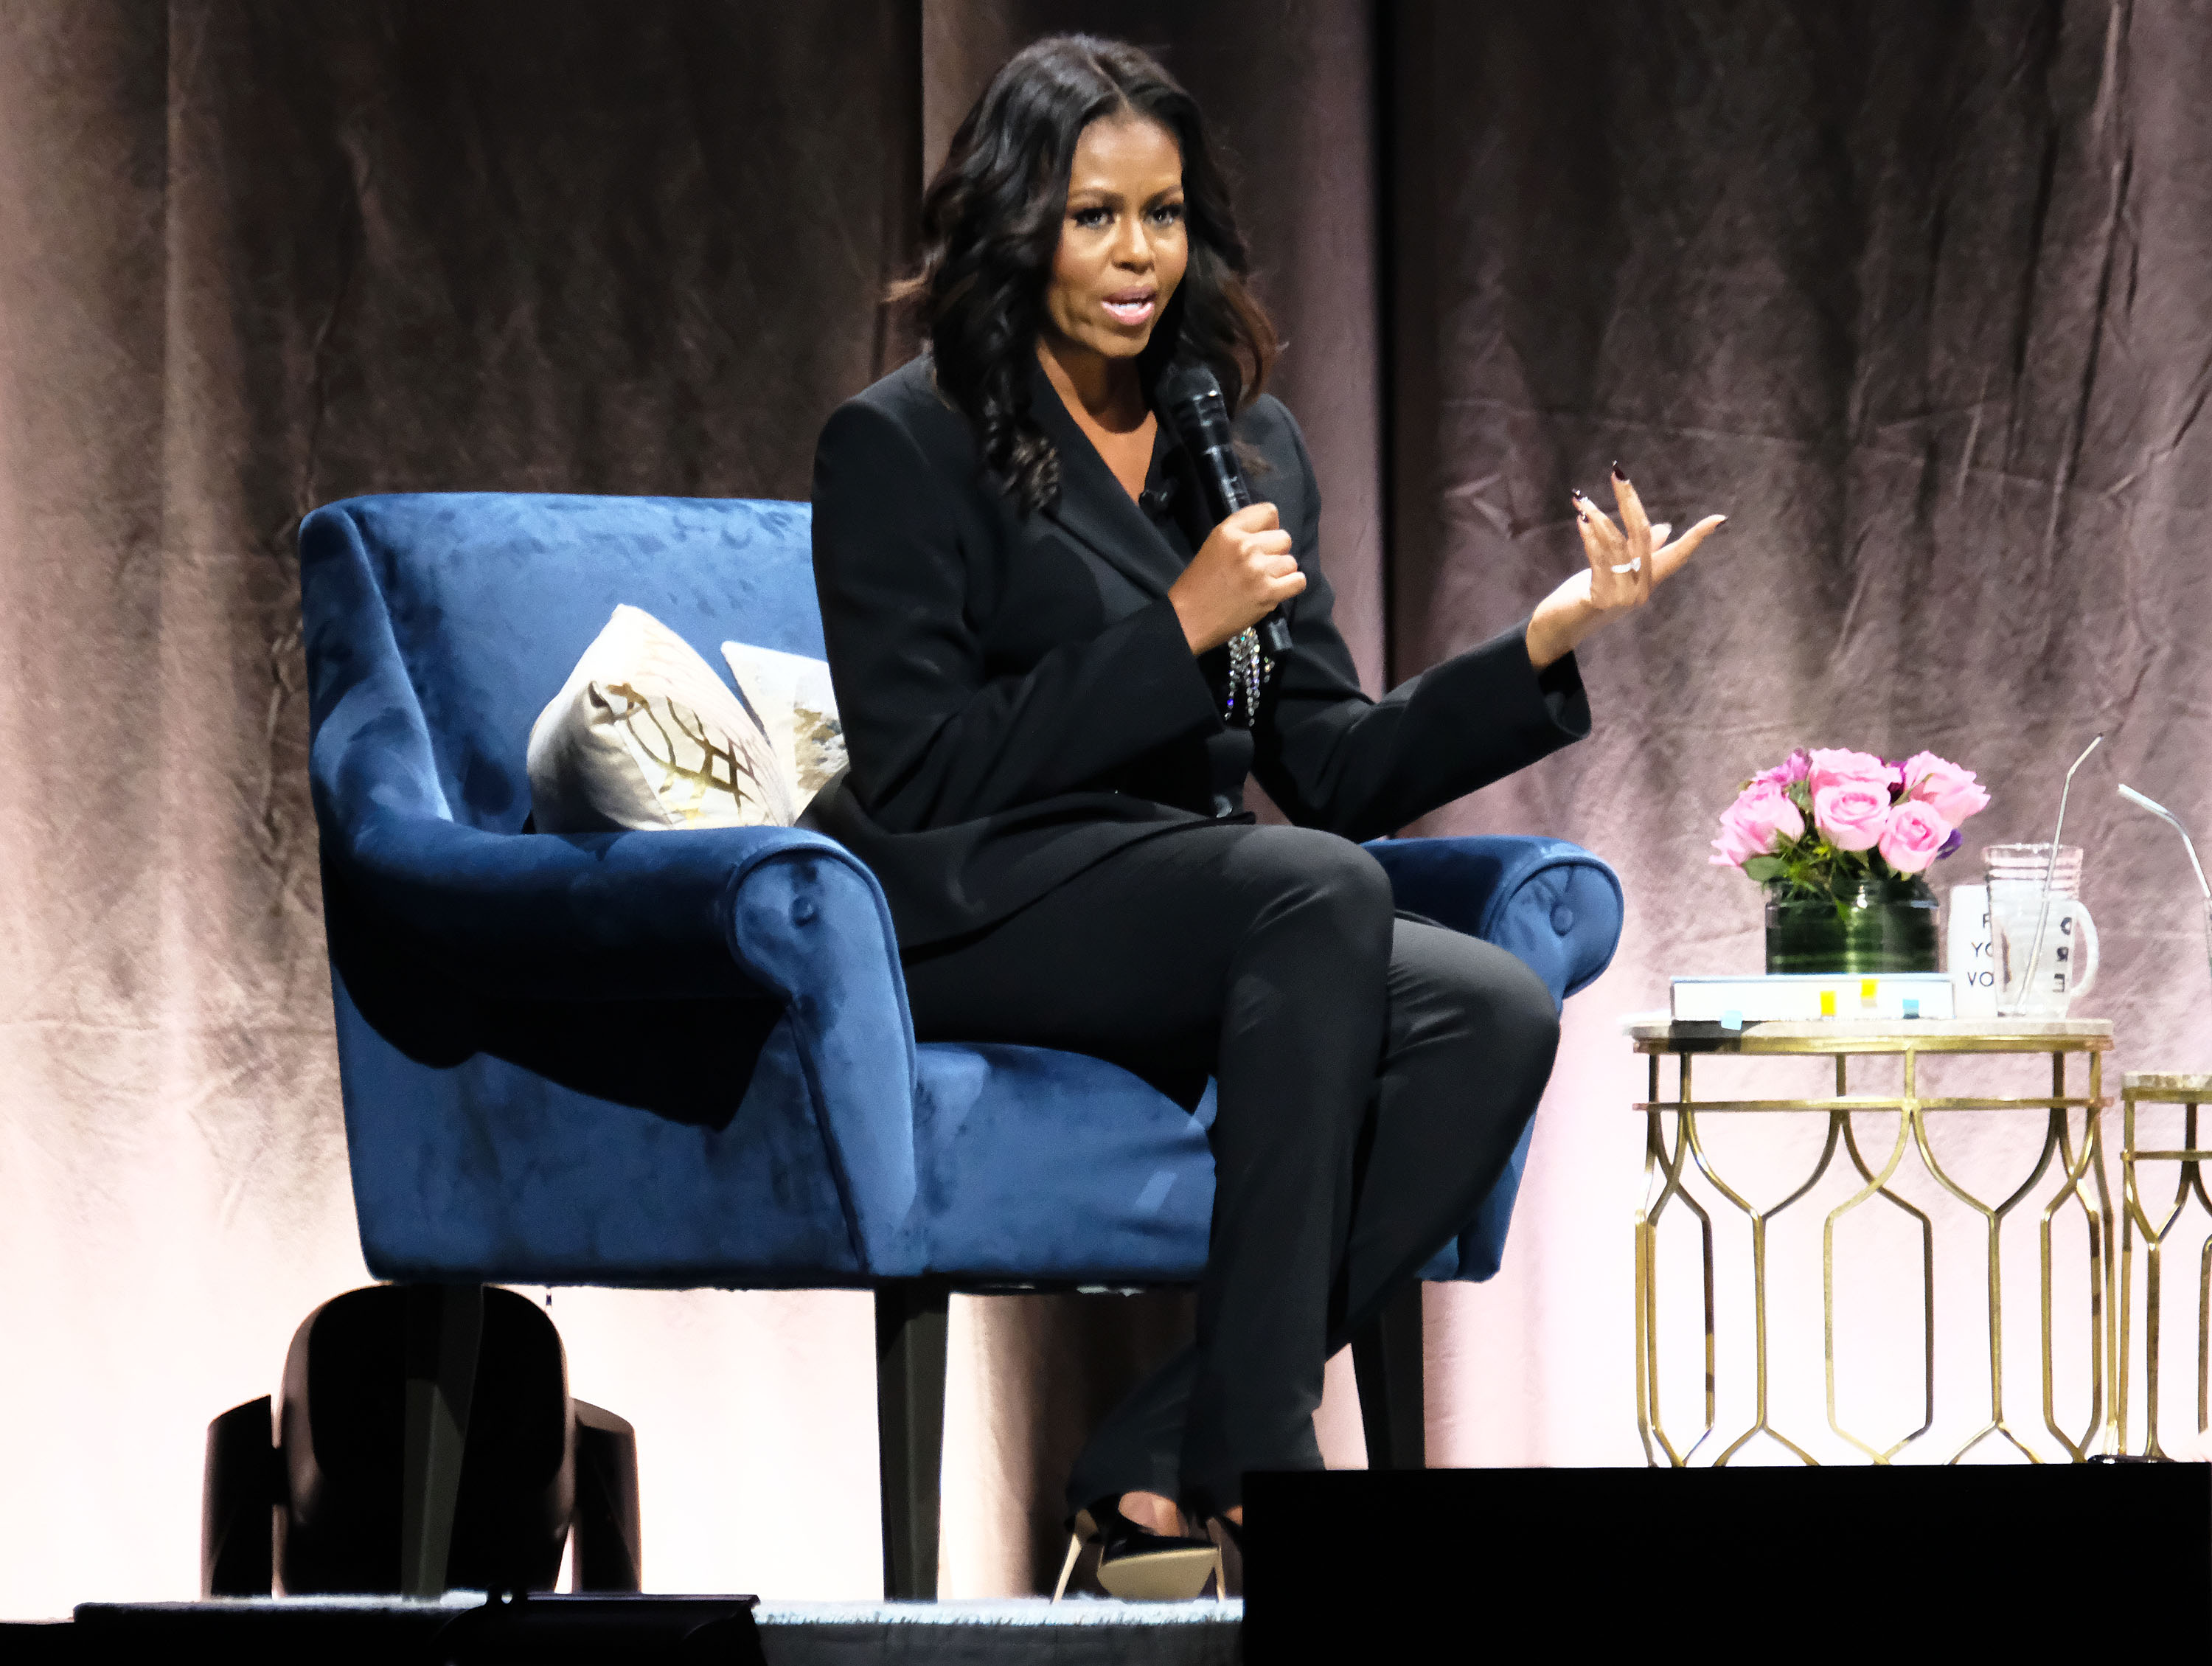 WASHINGTON, DC - NOVEMBER 17: Former First Lady Michelle Obama discusses her new book "Becoming" at Capital One Arena on November 17, 2018 in Washington, DC. (Photo by Paul Morigi/Getty Images)